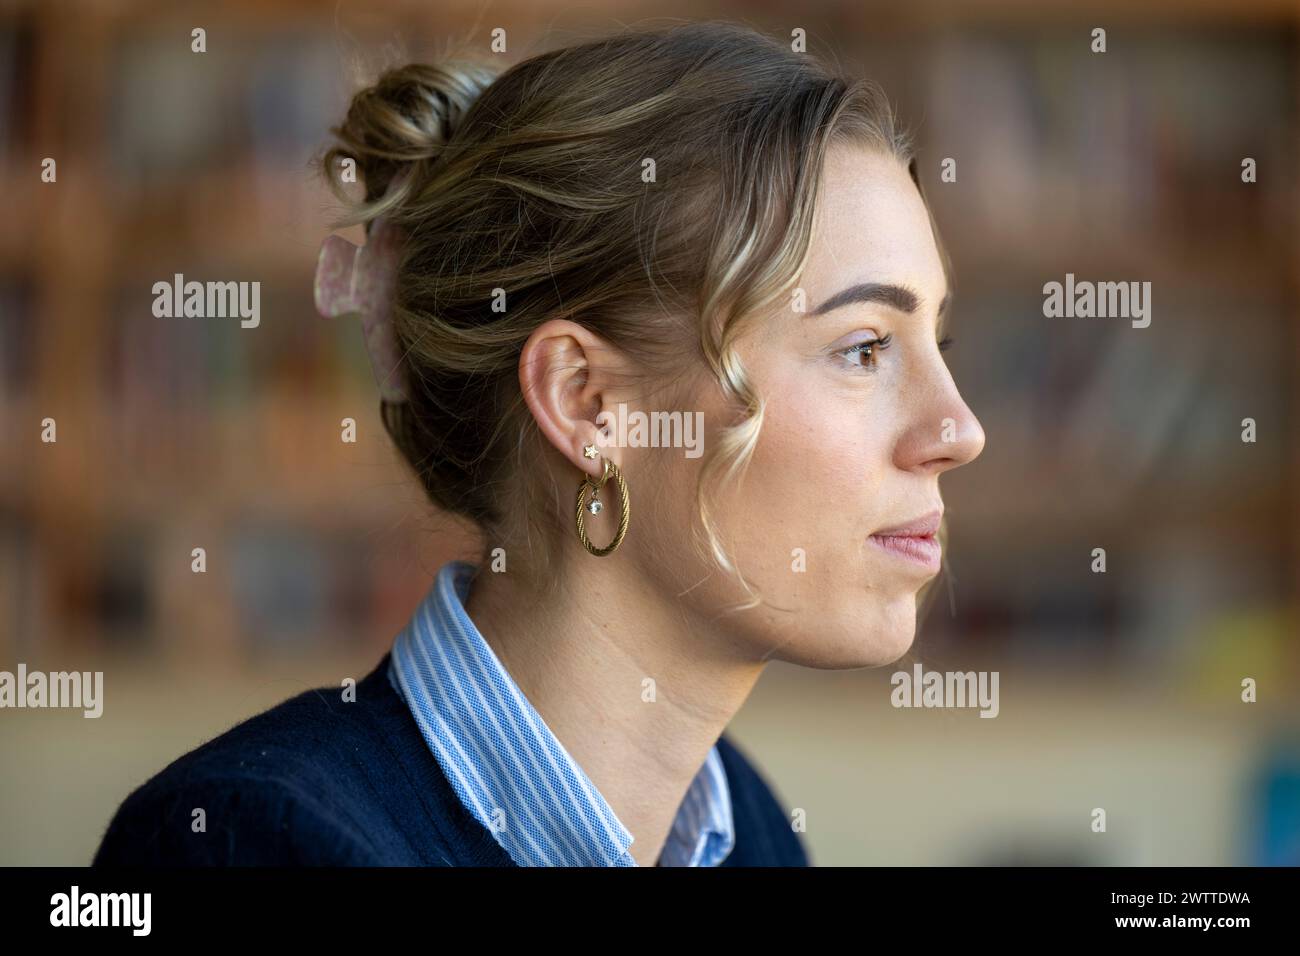 A contemplative young woman in a library setting. Stock Photo